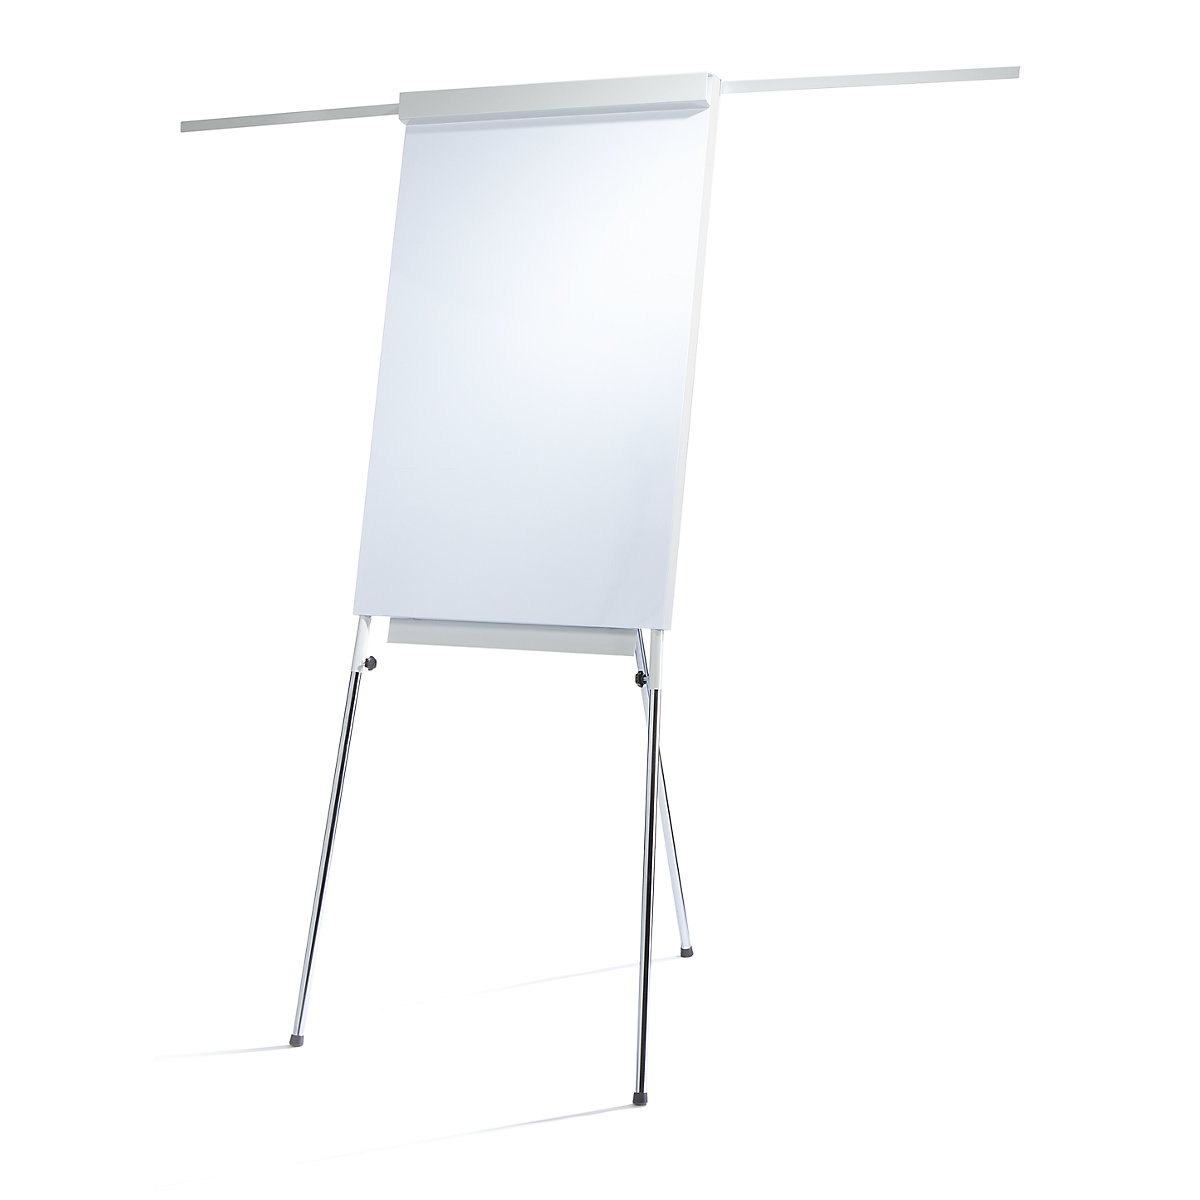 Executive Flip Chart Stand in Wuse - Stationery, Merkins Global Limited